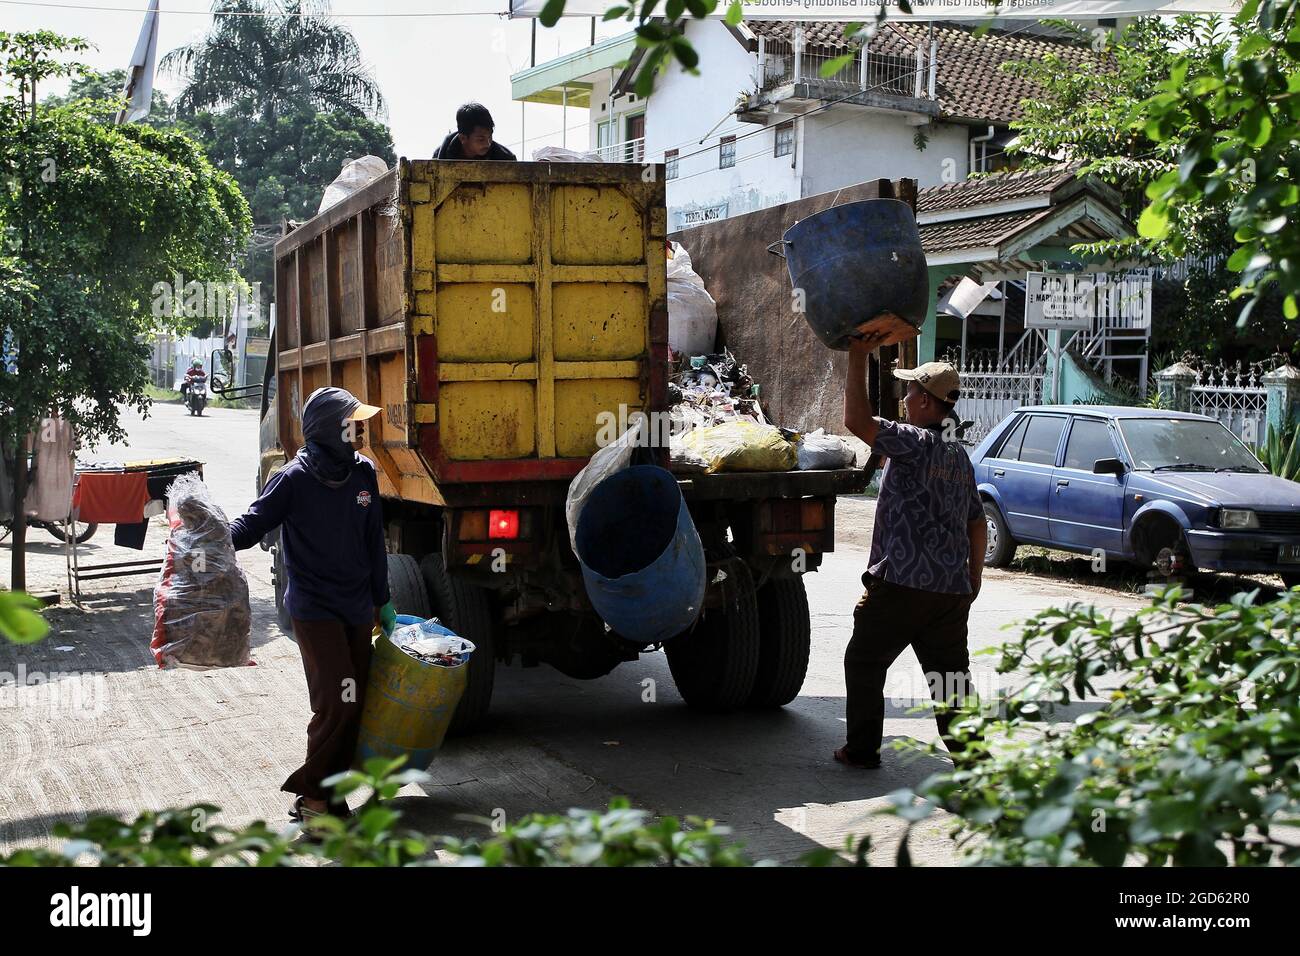 Bandung, West Java, Indonesia. 2 men are carrying garbage to the garbage truck Stock Photo